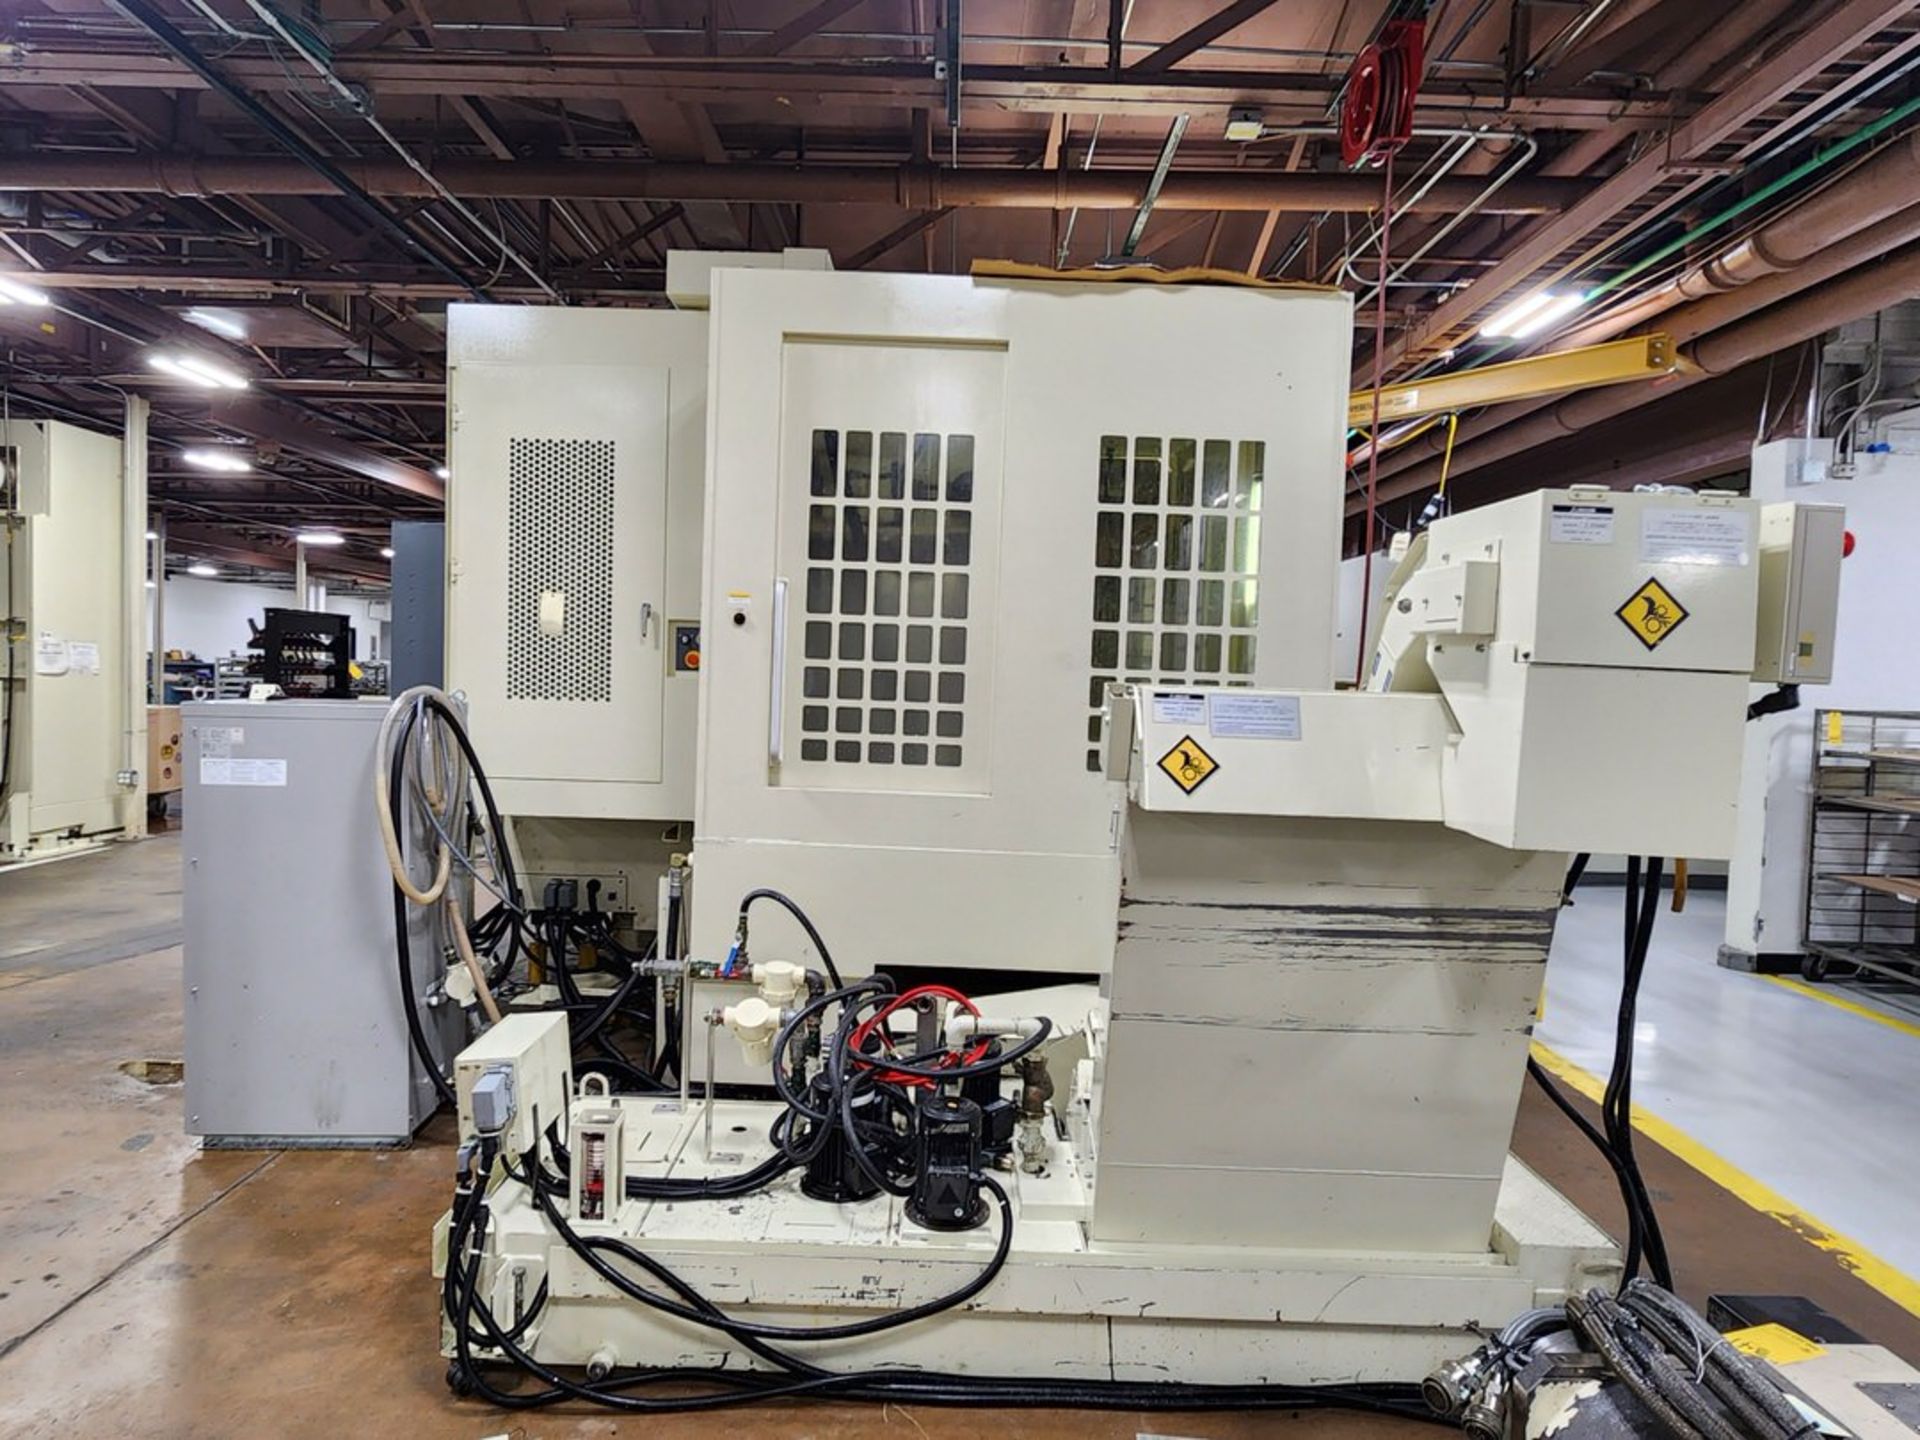 2008 Kitamura 7HiF Vertical Machining Center W/ Fanuc Series 16i-MB; 30,000 Spindle Speed; - Image 12 of 23